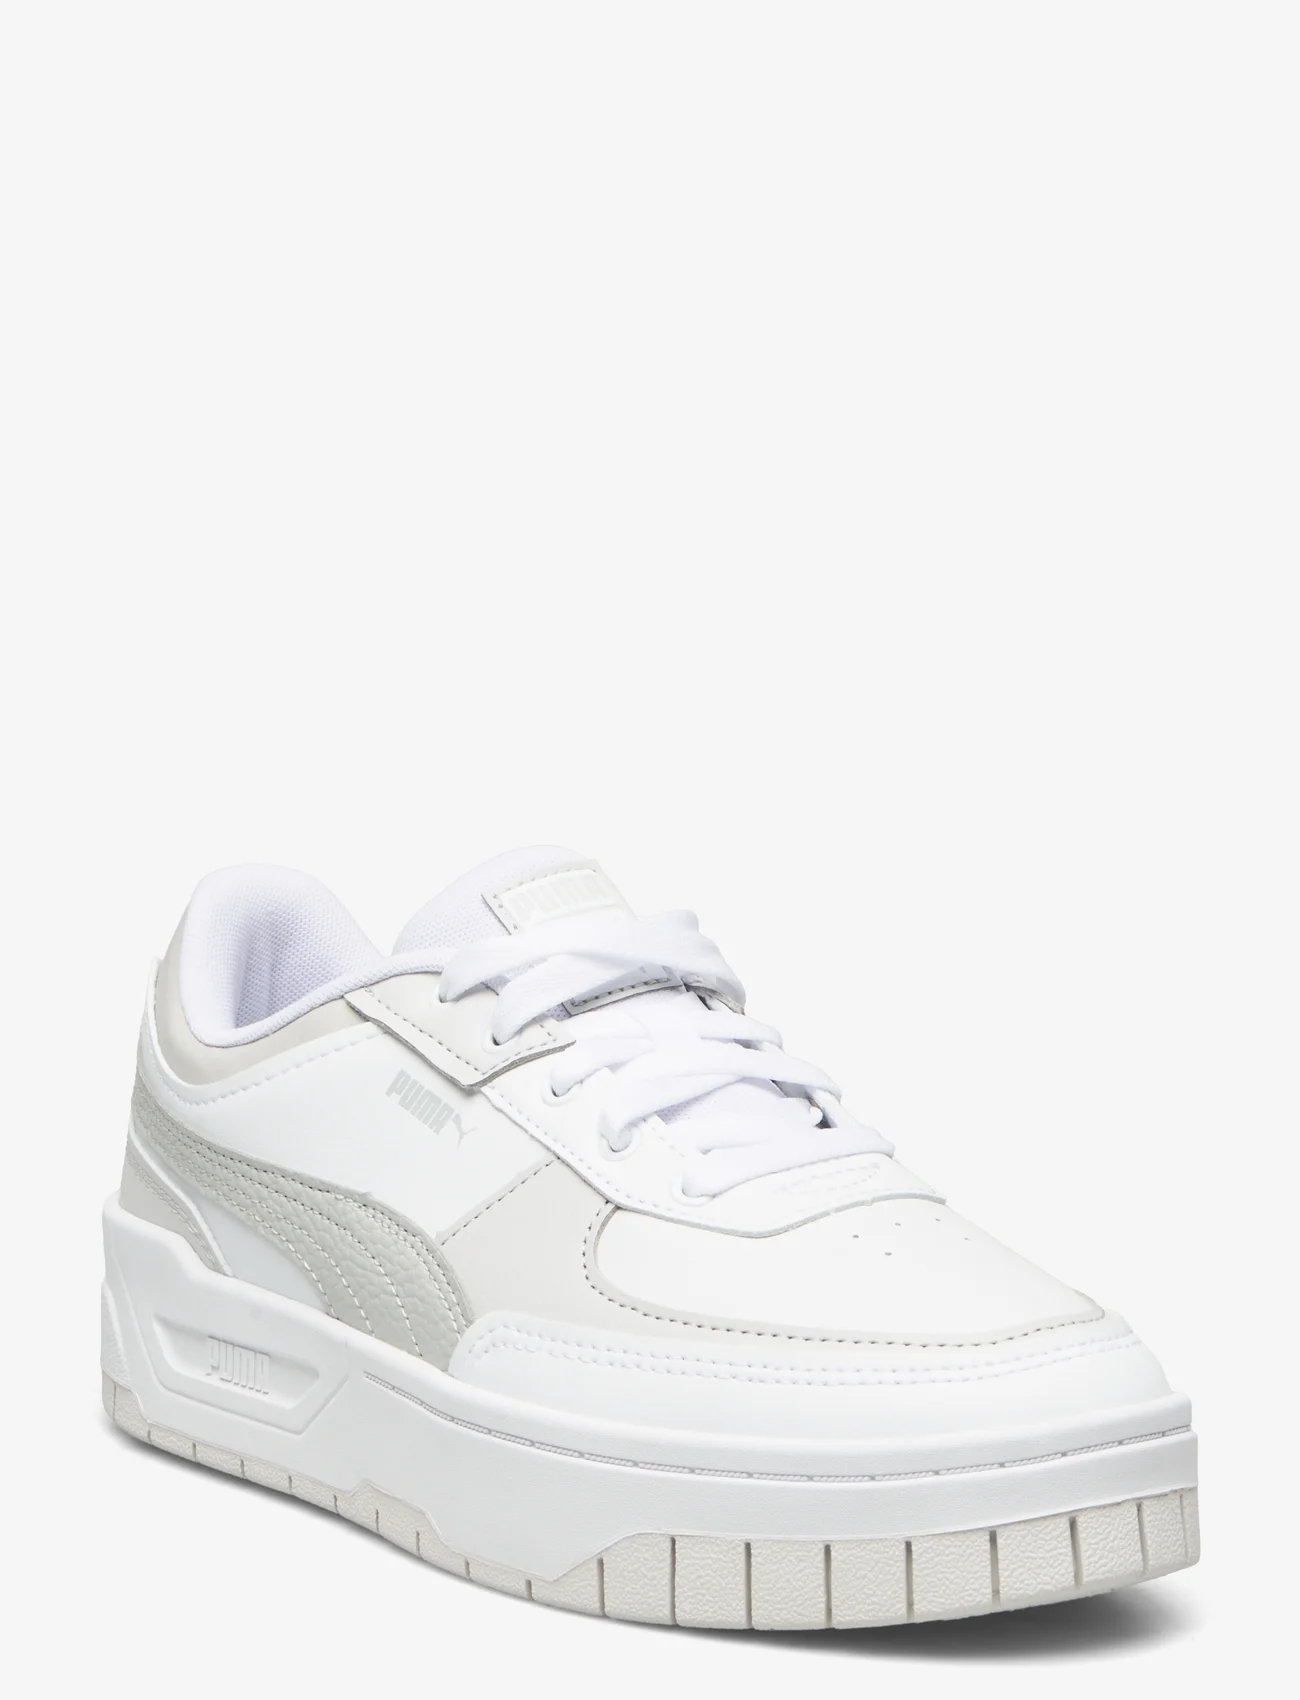 PUMA - Cali Dream Lth Wns - low top sneakers - puma white-feather gray - 0